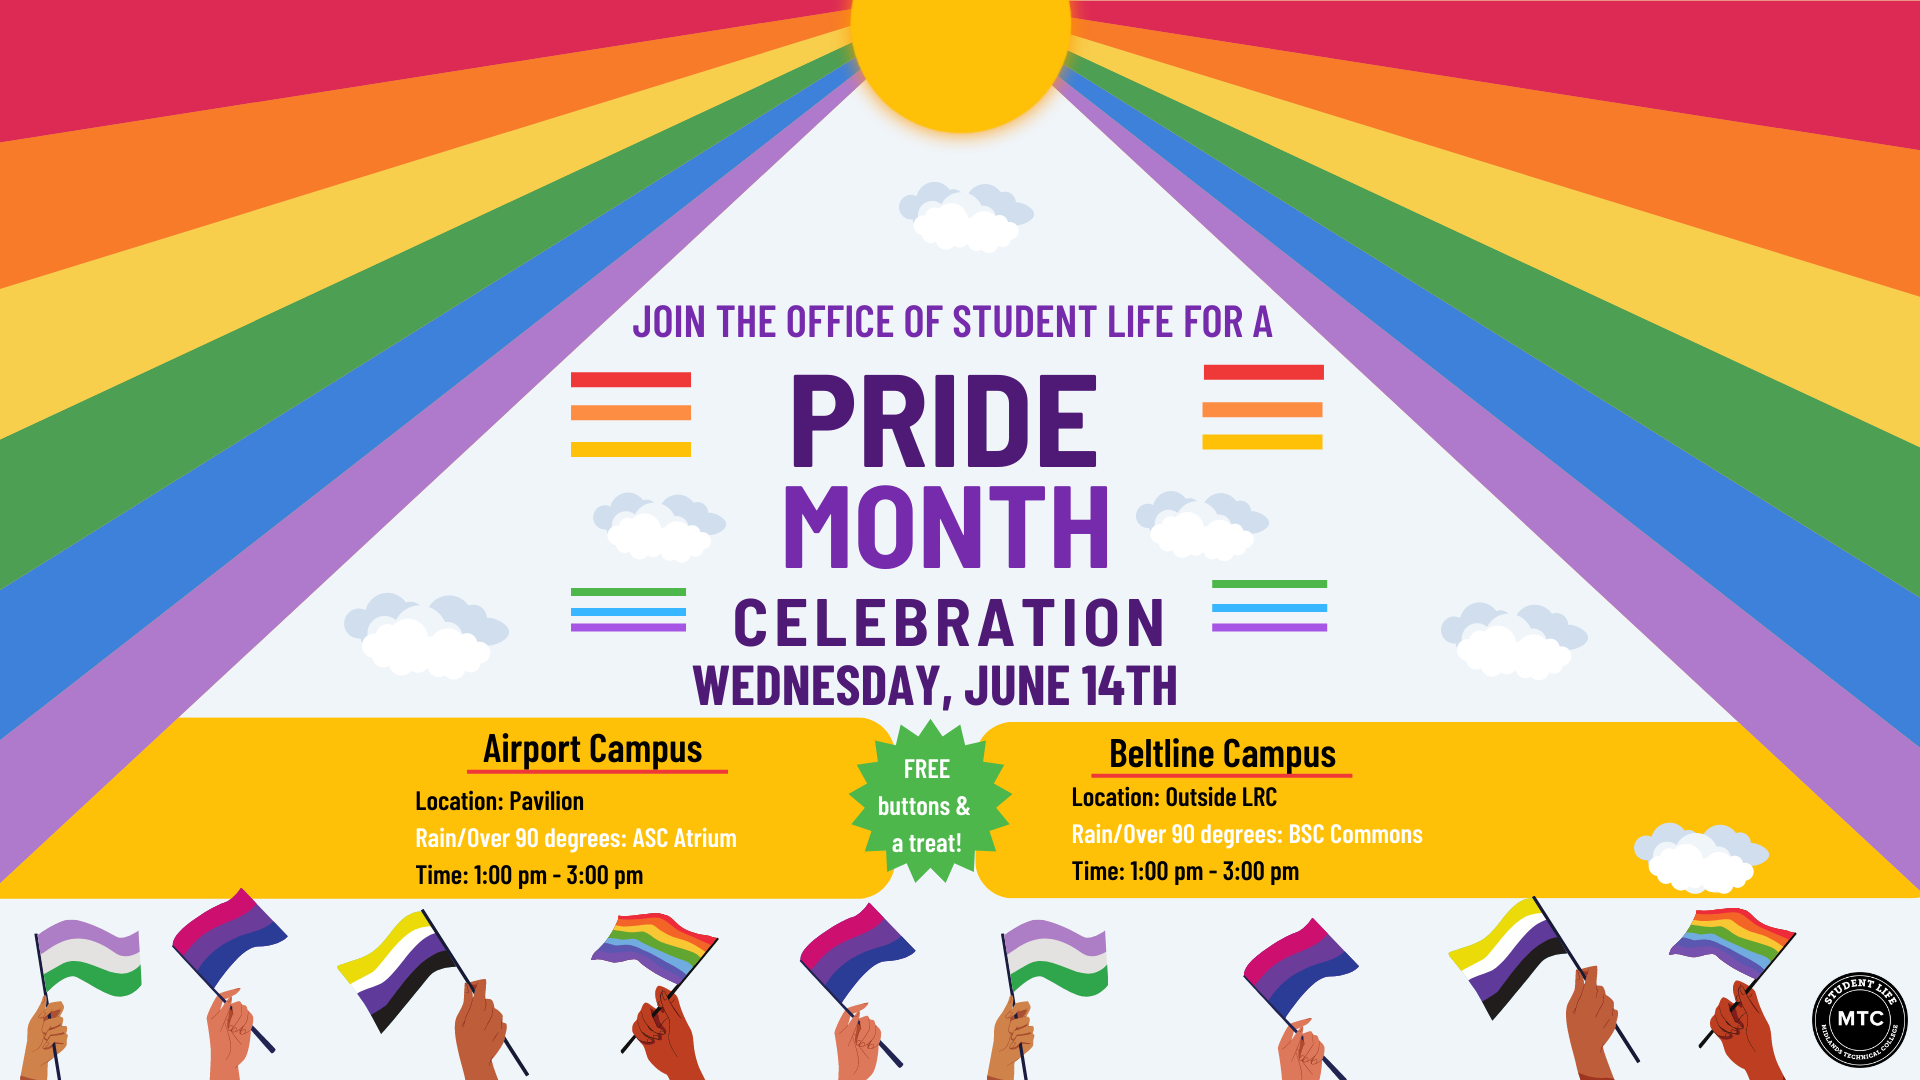 Join the Office of Student Life for a Pride Month Celebration!  Airport Campus: Pavilion Rain/over 90 degrees: Airport Student Center Atrium 1 pm - 3 pm  Beltline Campus: Outside LRC Rain/over 90 degrees: Beltline Student Center Commons 1 pm - 3 pm